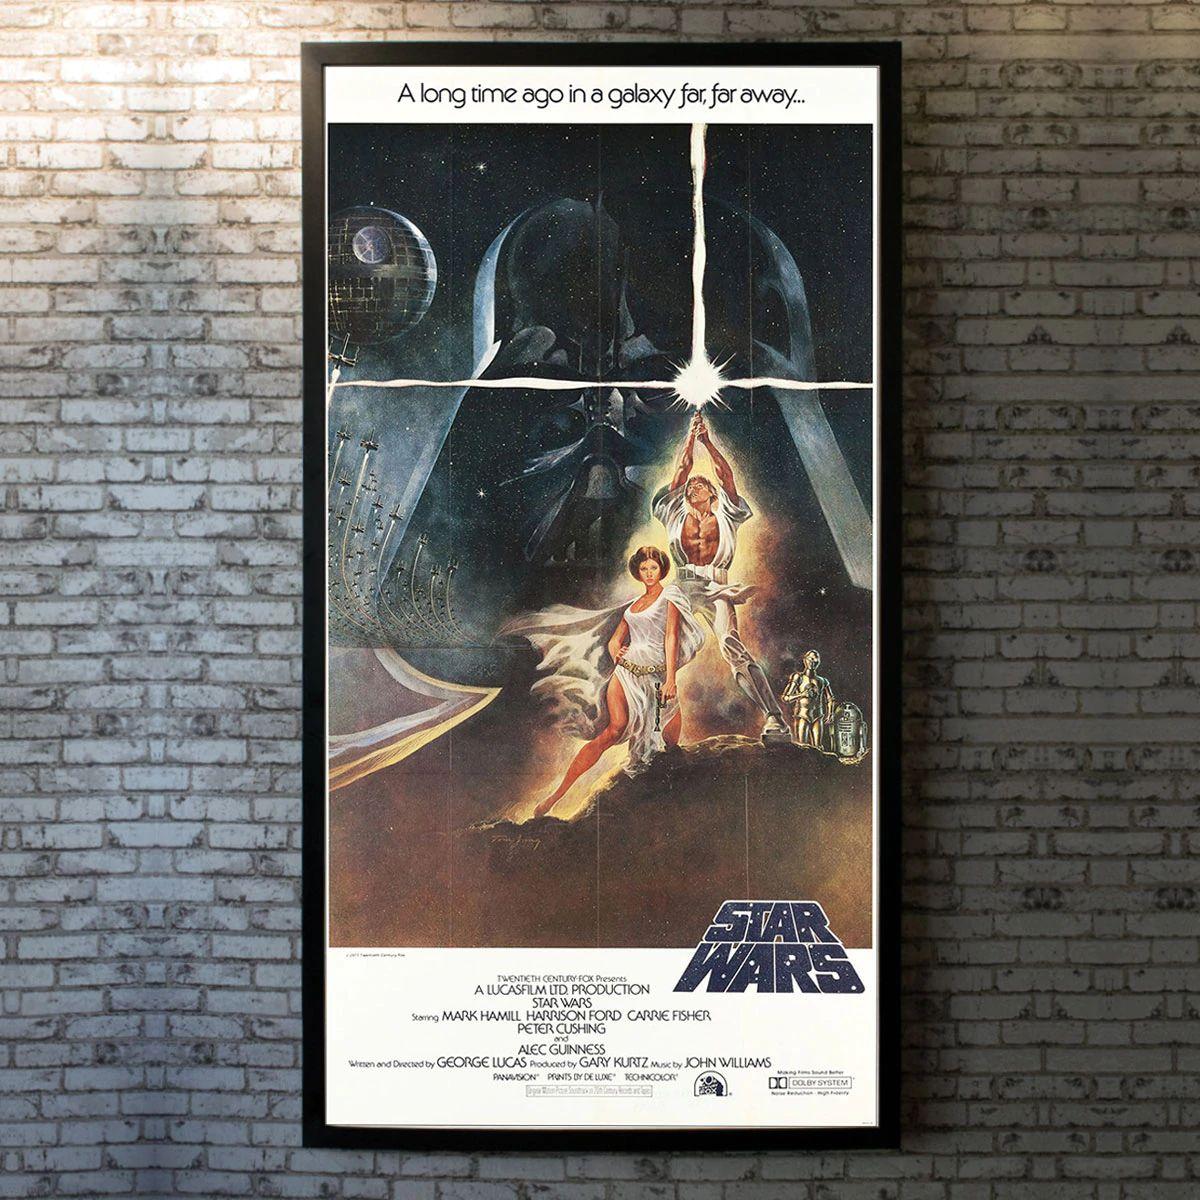 Star Wars: Episode IV - a New Hope, Unframed Poster, 1977

Three Sheet (41 X 81 Inches). Luke Skywalker joins forces with a Jedi Knight, a cocky pilot, a Wookiee and two droids to save the galaxy from the Empire's world-destroying battle station,